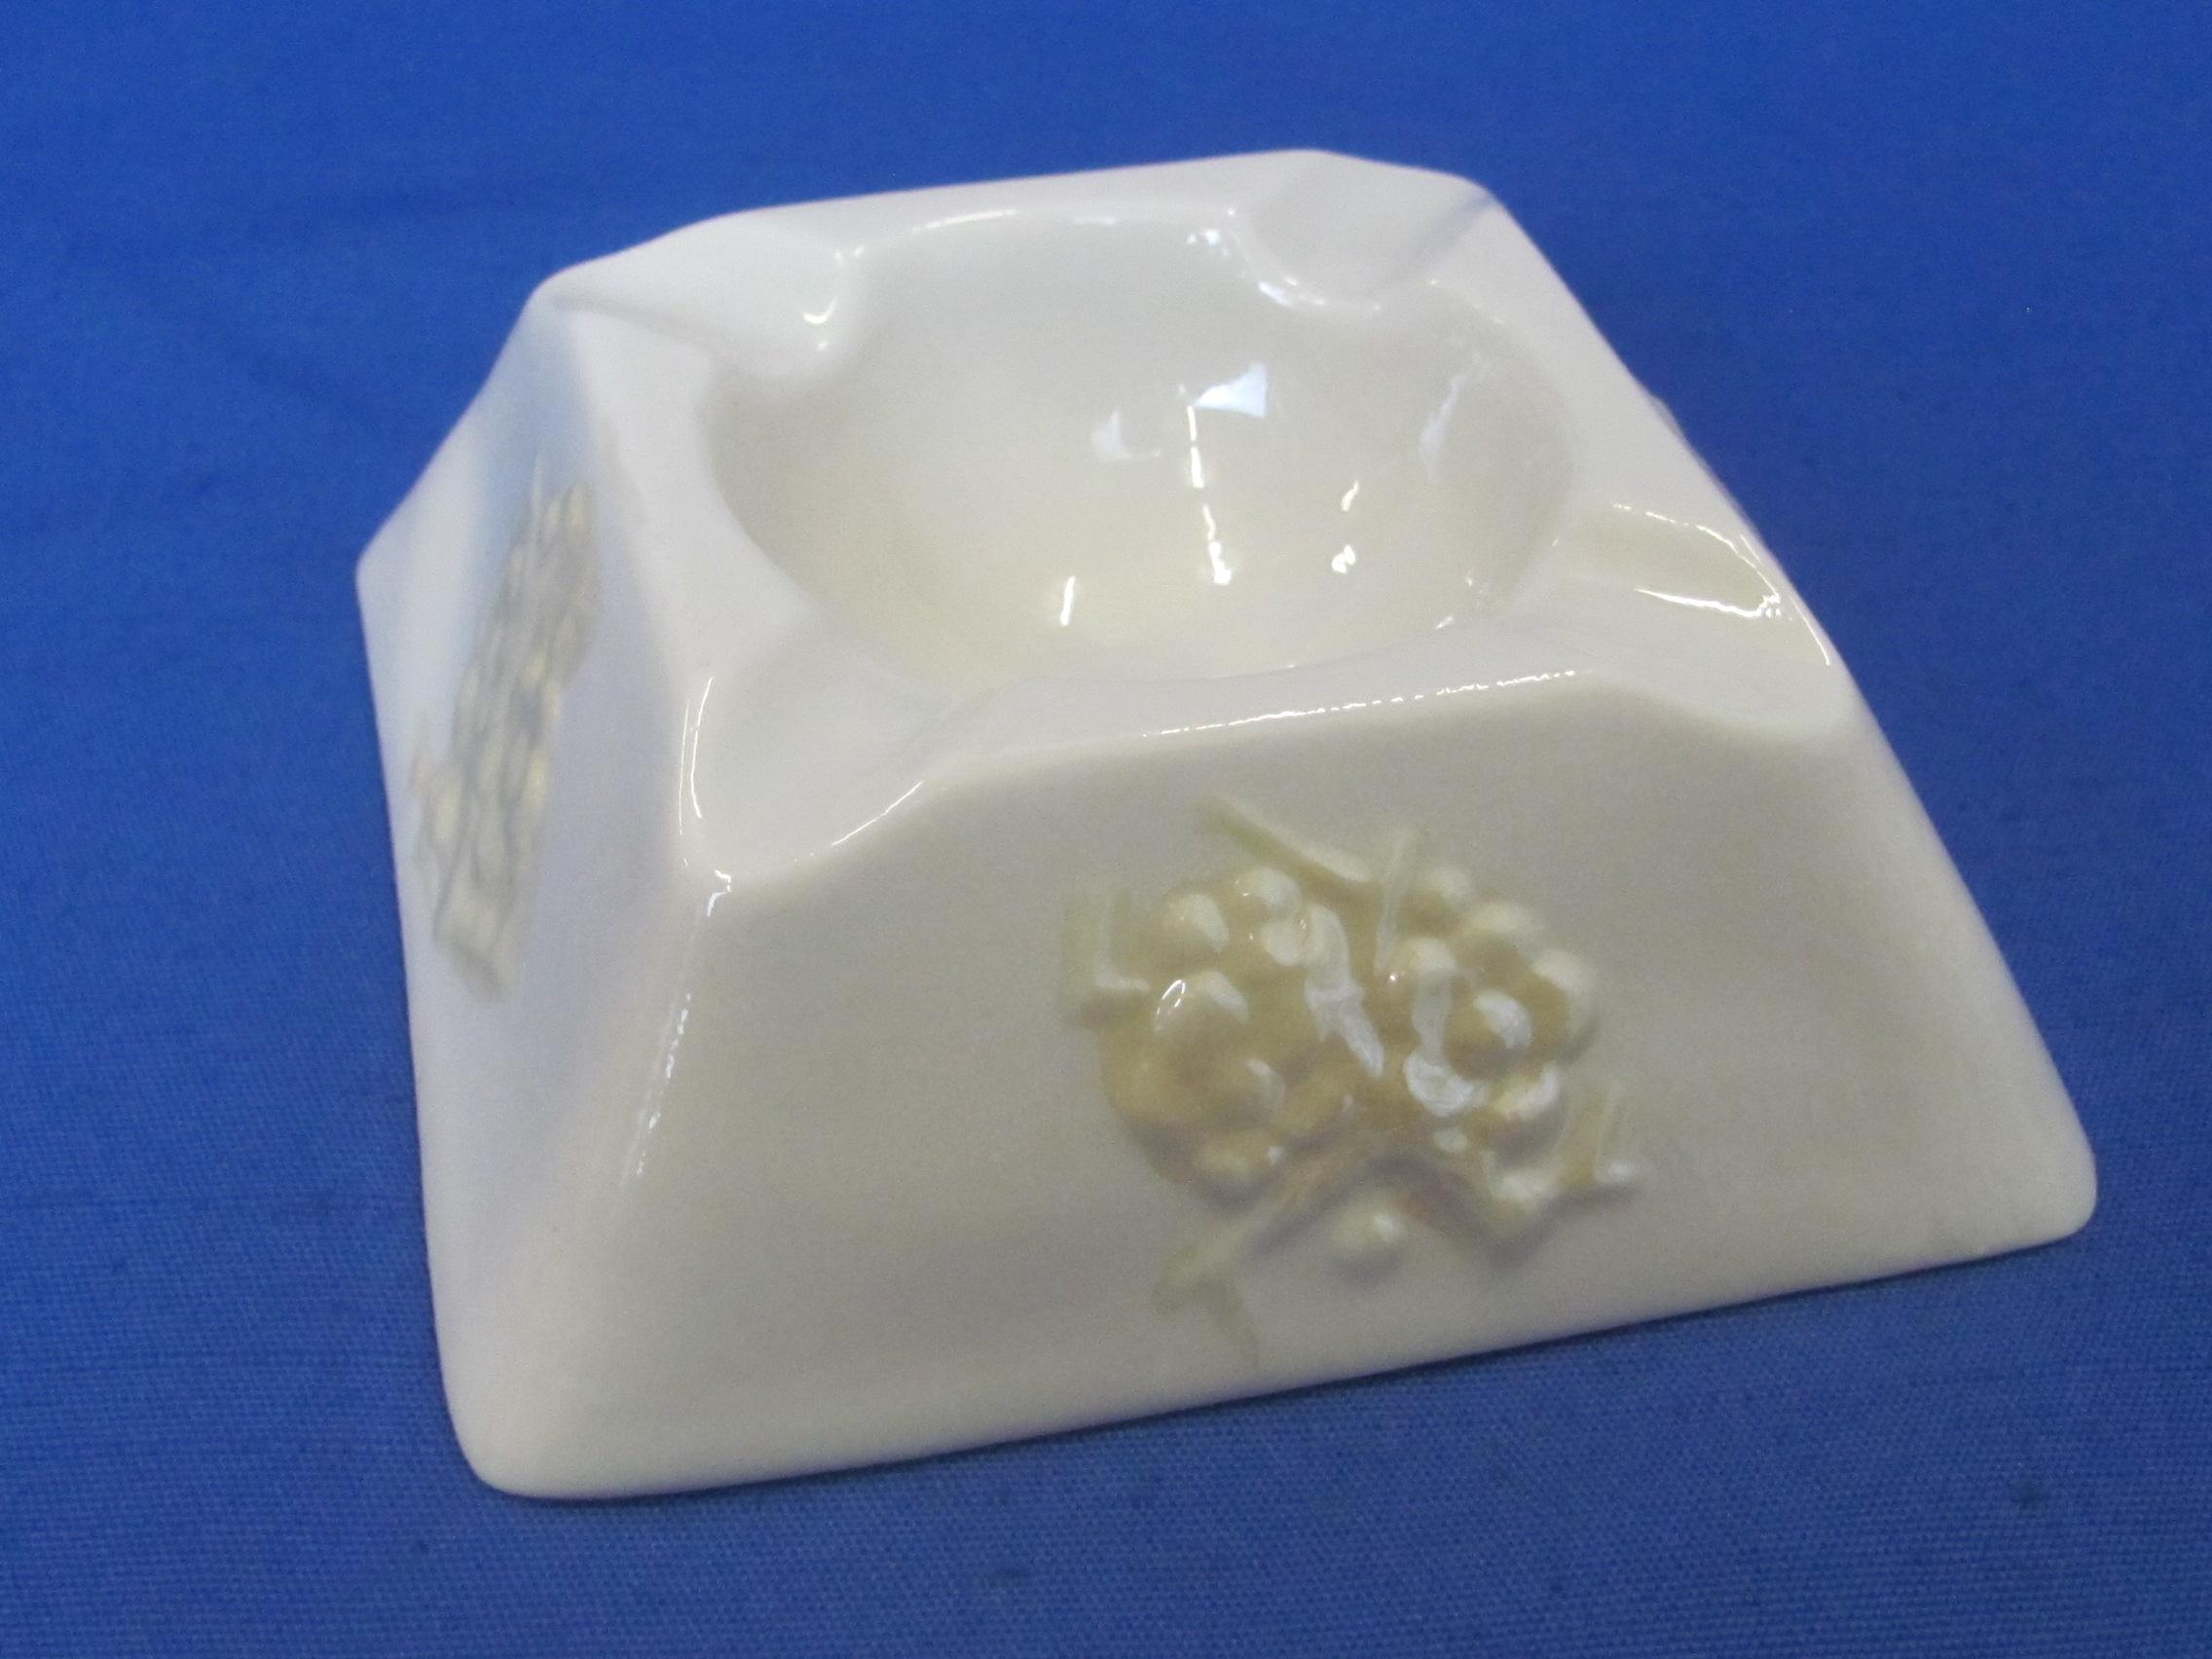 Belleek Pottery Ashtray – Square w Floral Design - 6th Green Mark – 1965 to 1980